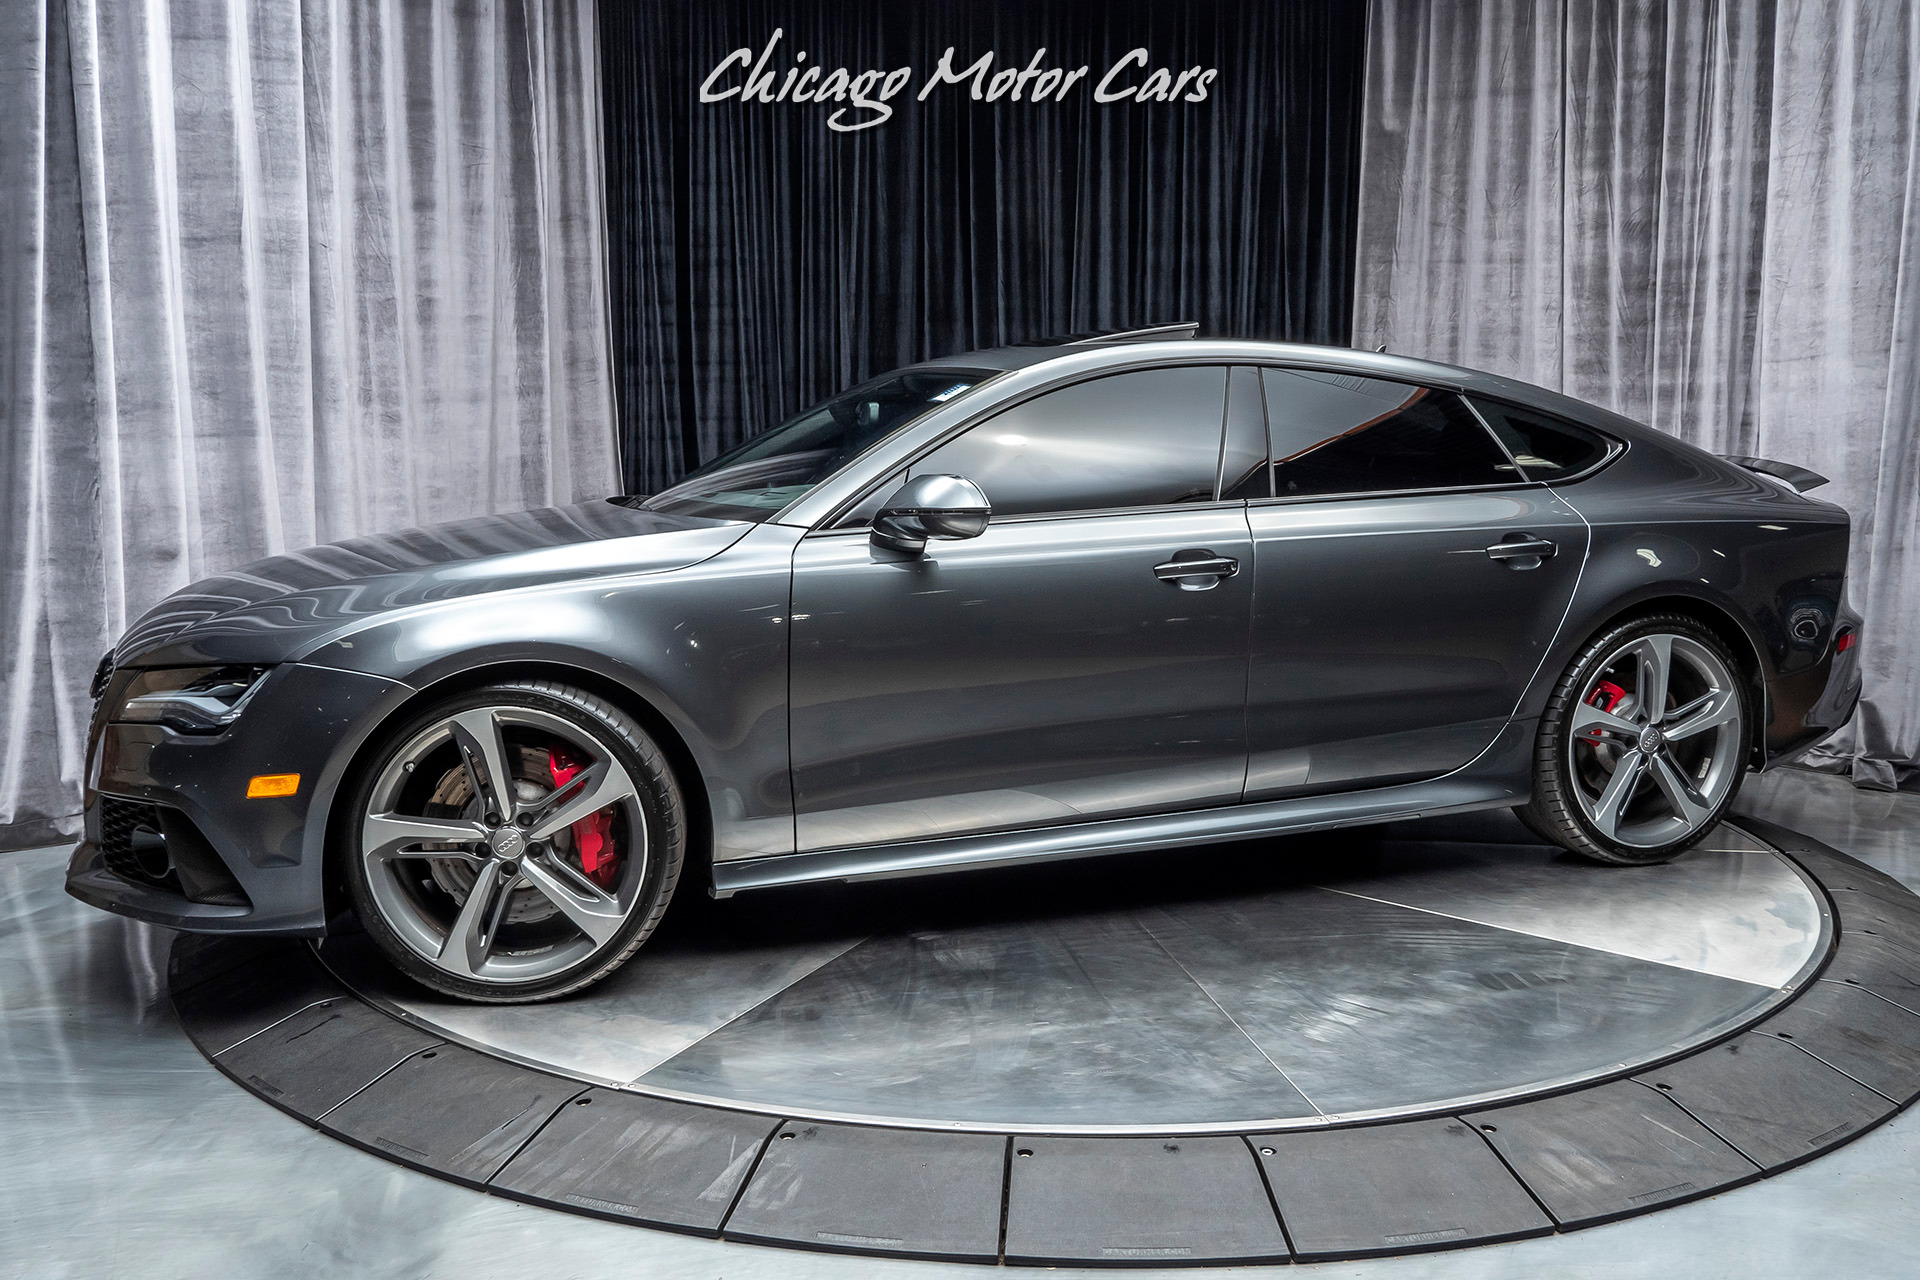 Used 2015 Audi RS7 4.0T quattro Prestige 700+HP UPGRADES! For Sale (Special  Pricing) | Chicago Motor Cars Stock #16041A